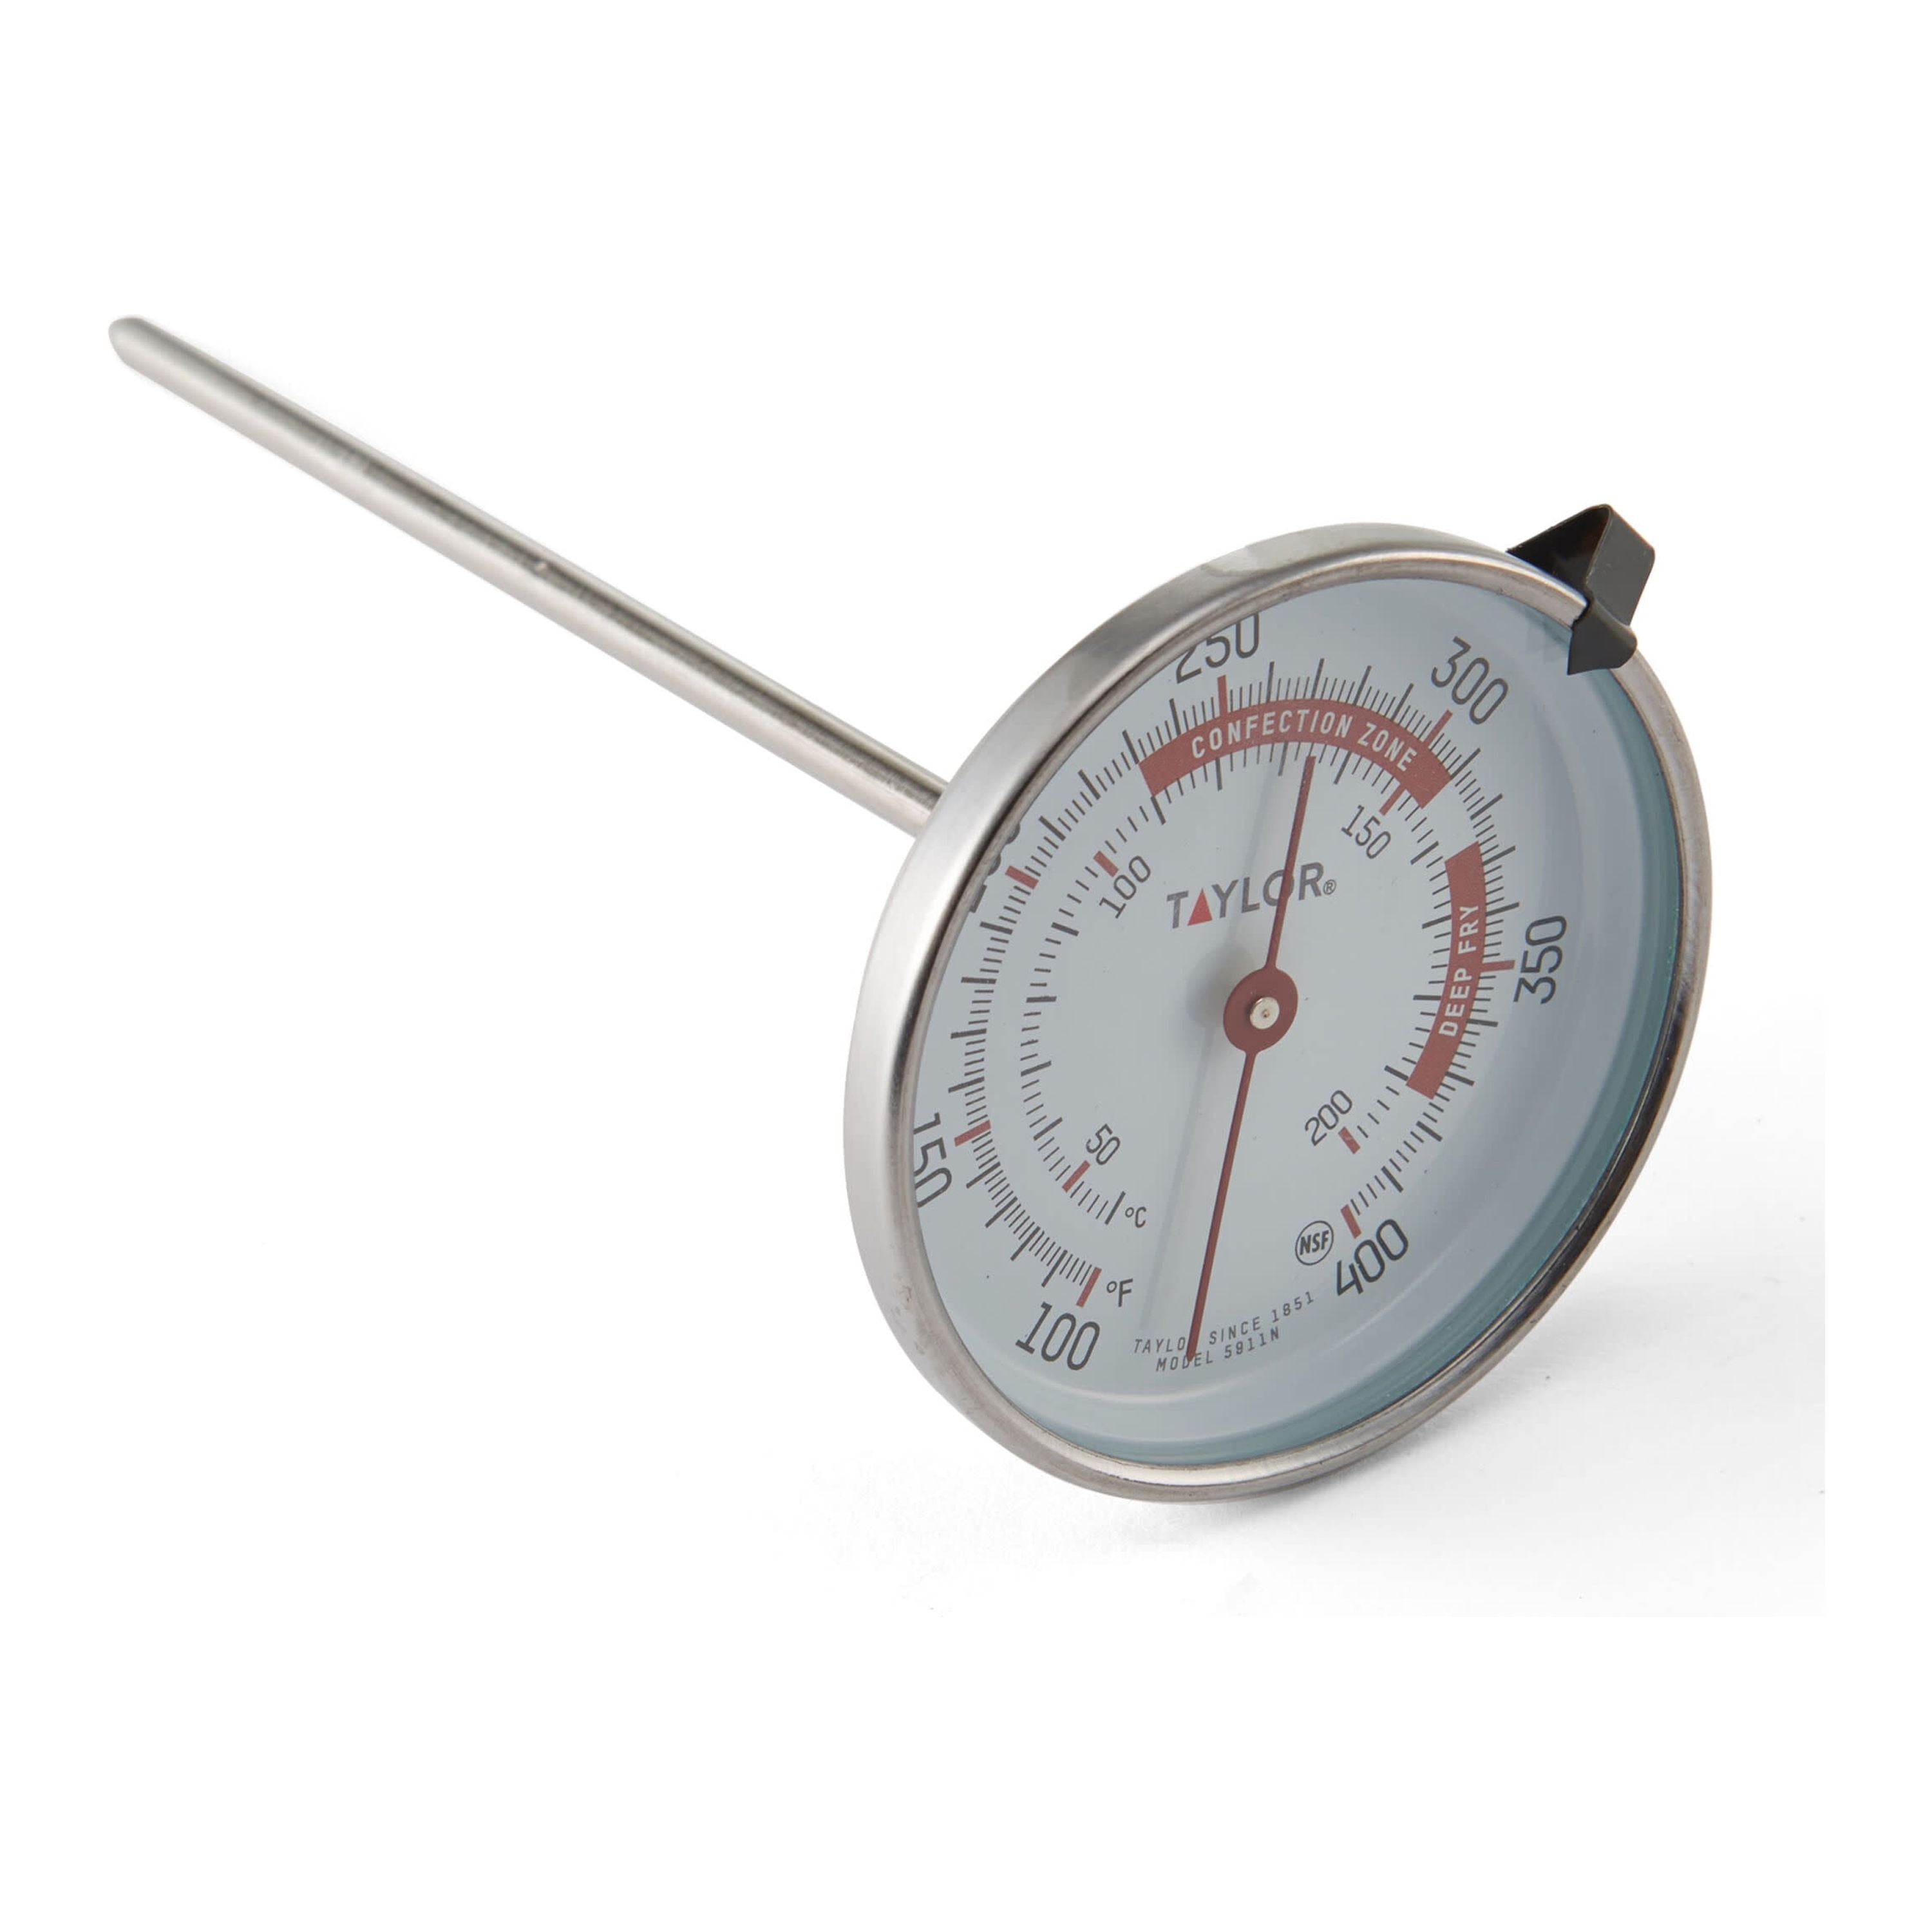 Taylor 5983N 12 Candy / Deep Fry Paddle Thermometer